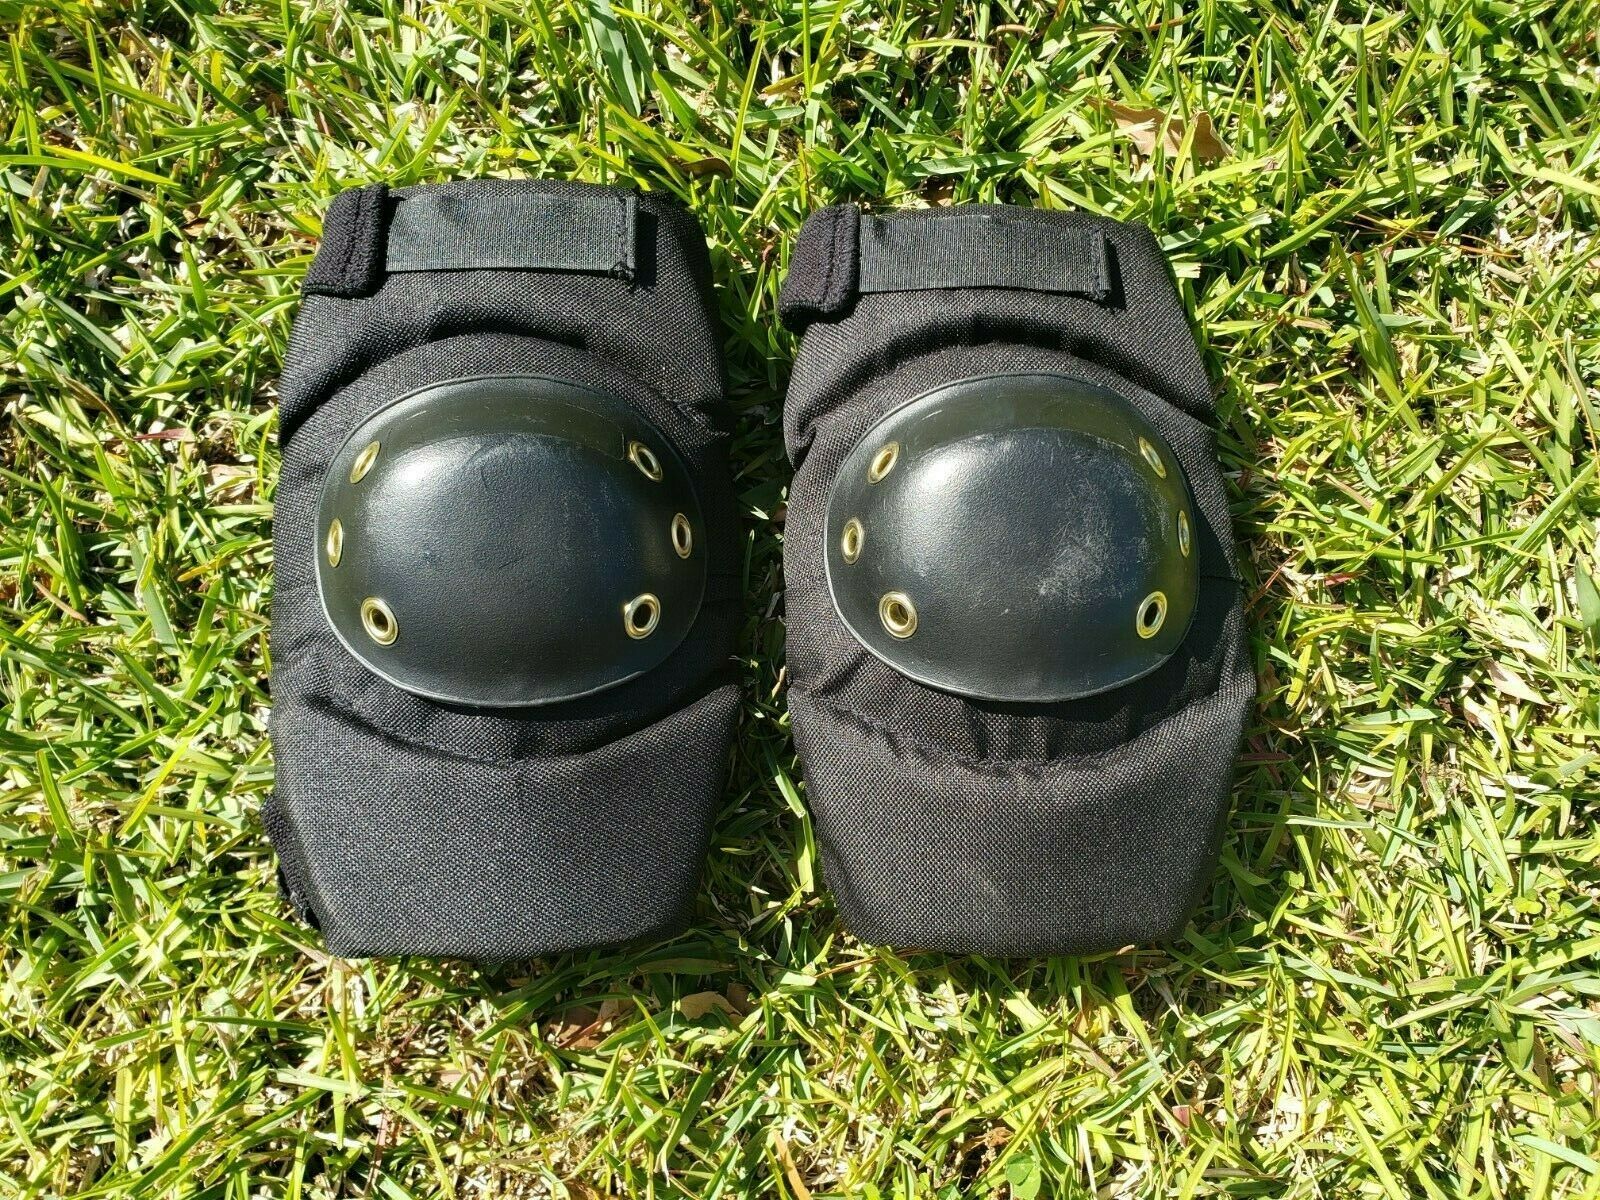 Black Tactical Elbow Pads Military Police, Paintball, Airsoft, Skate, Skateboard